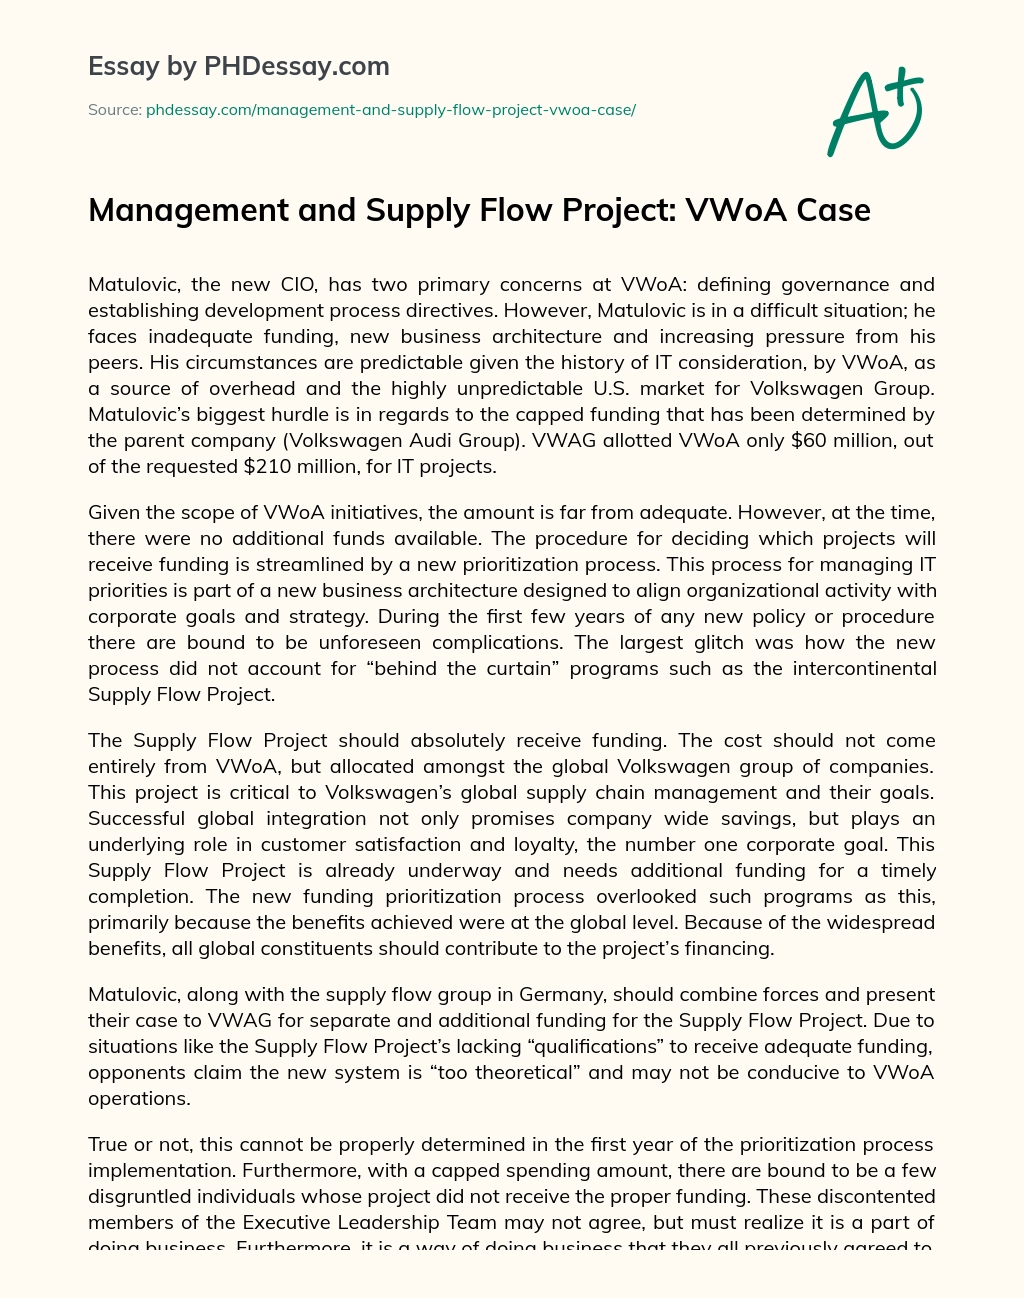 Management and Supply Flow Project: VWoA Case essay